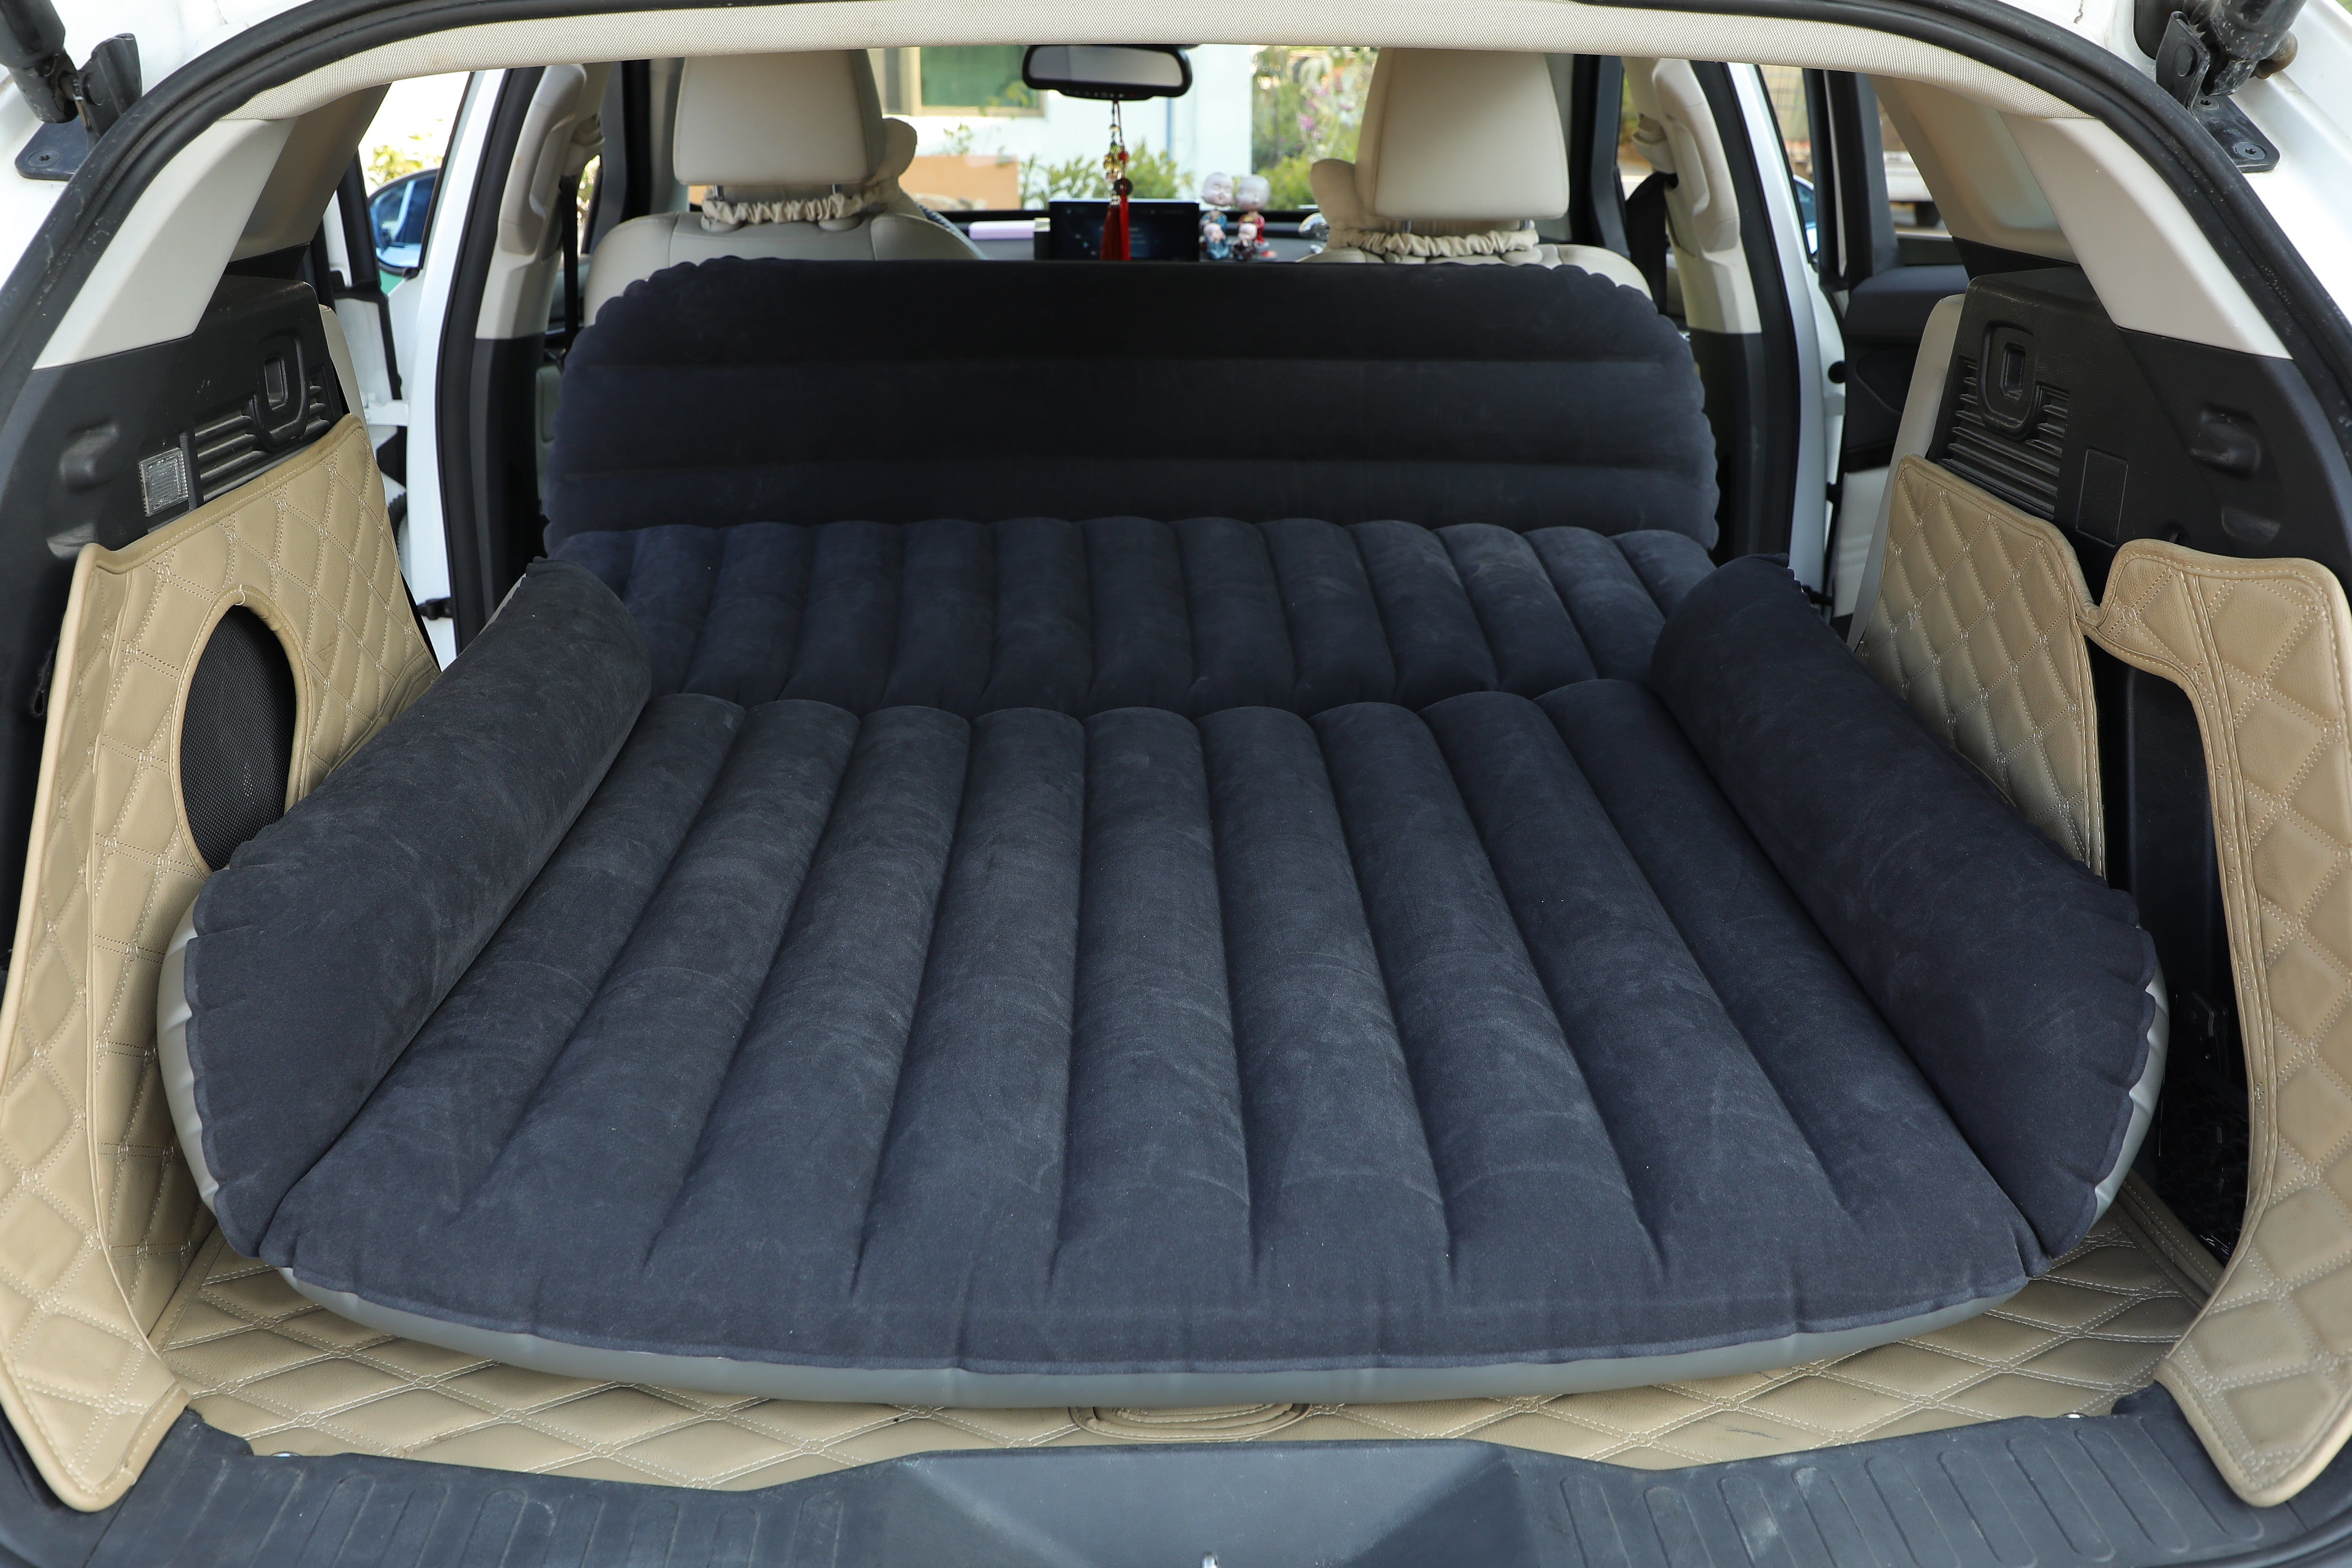 Heavy Duty Inflatable Car Mattress Bed for SUV Minivan Back Seat Best Air Mattress For Back Of Suv